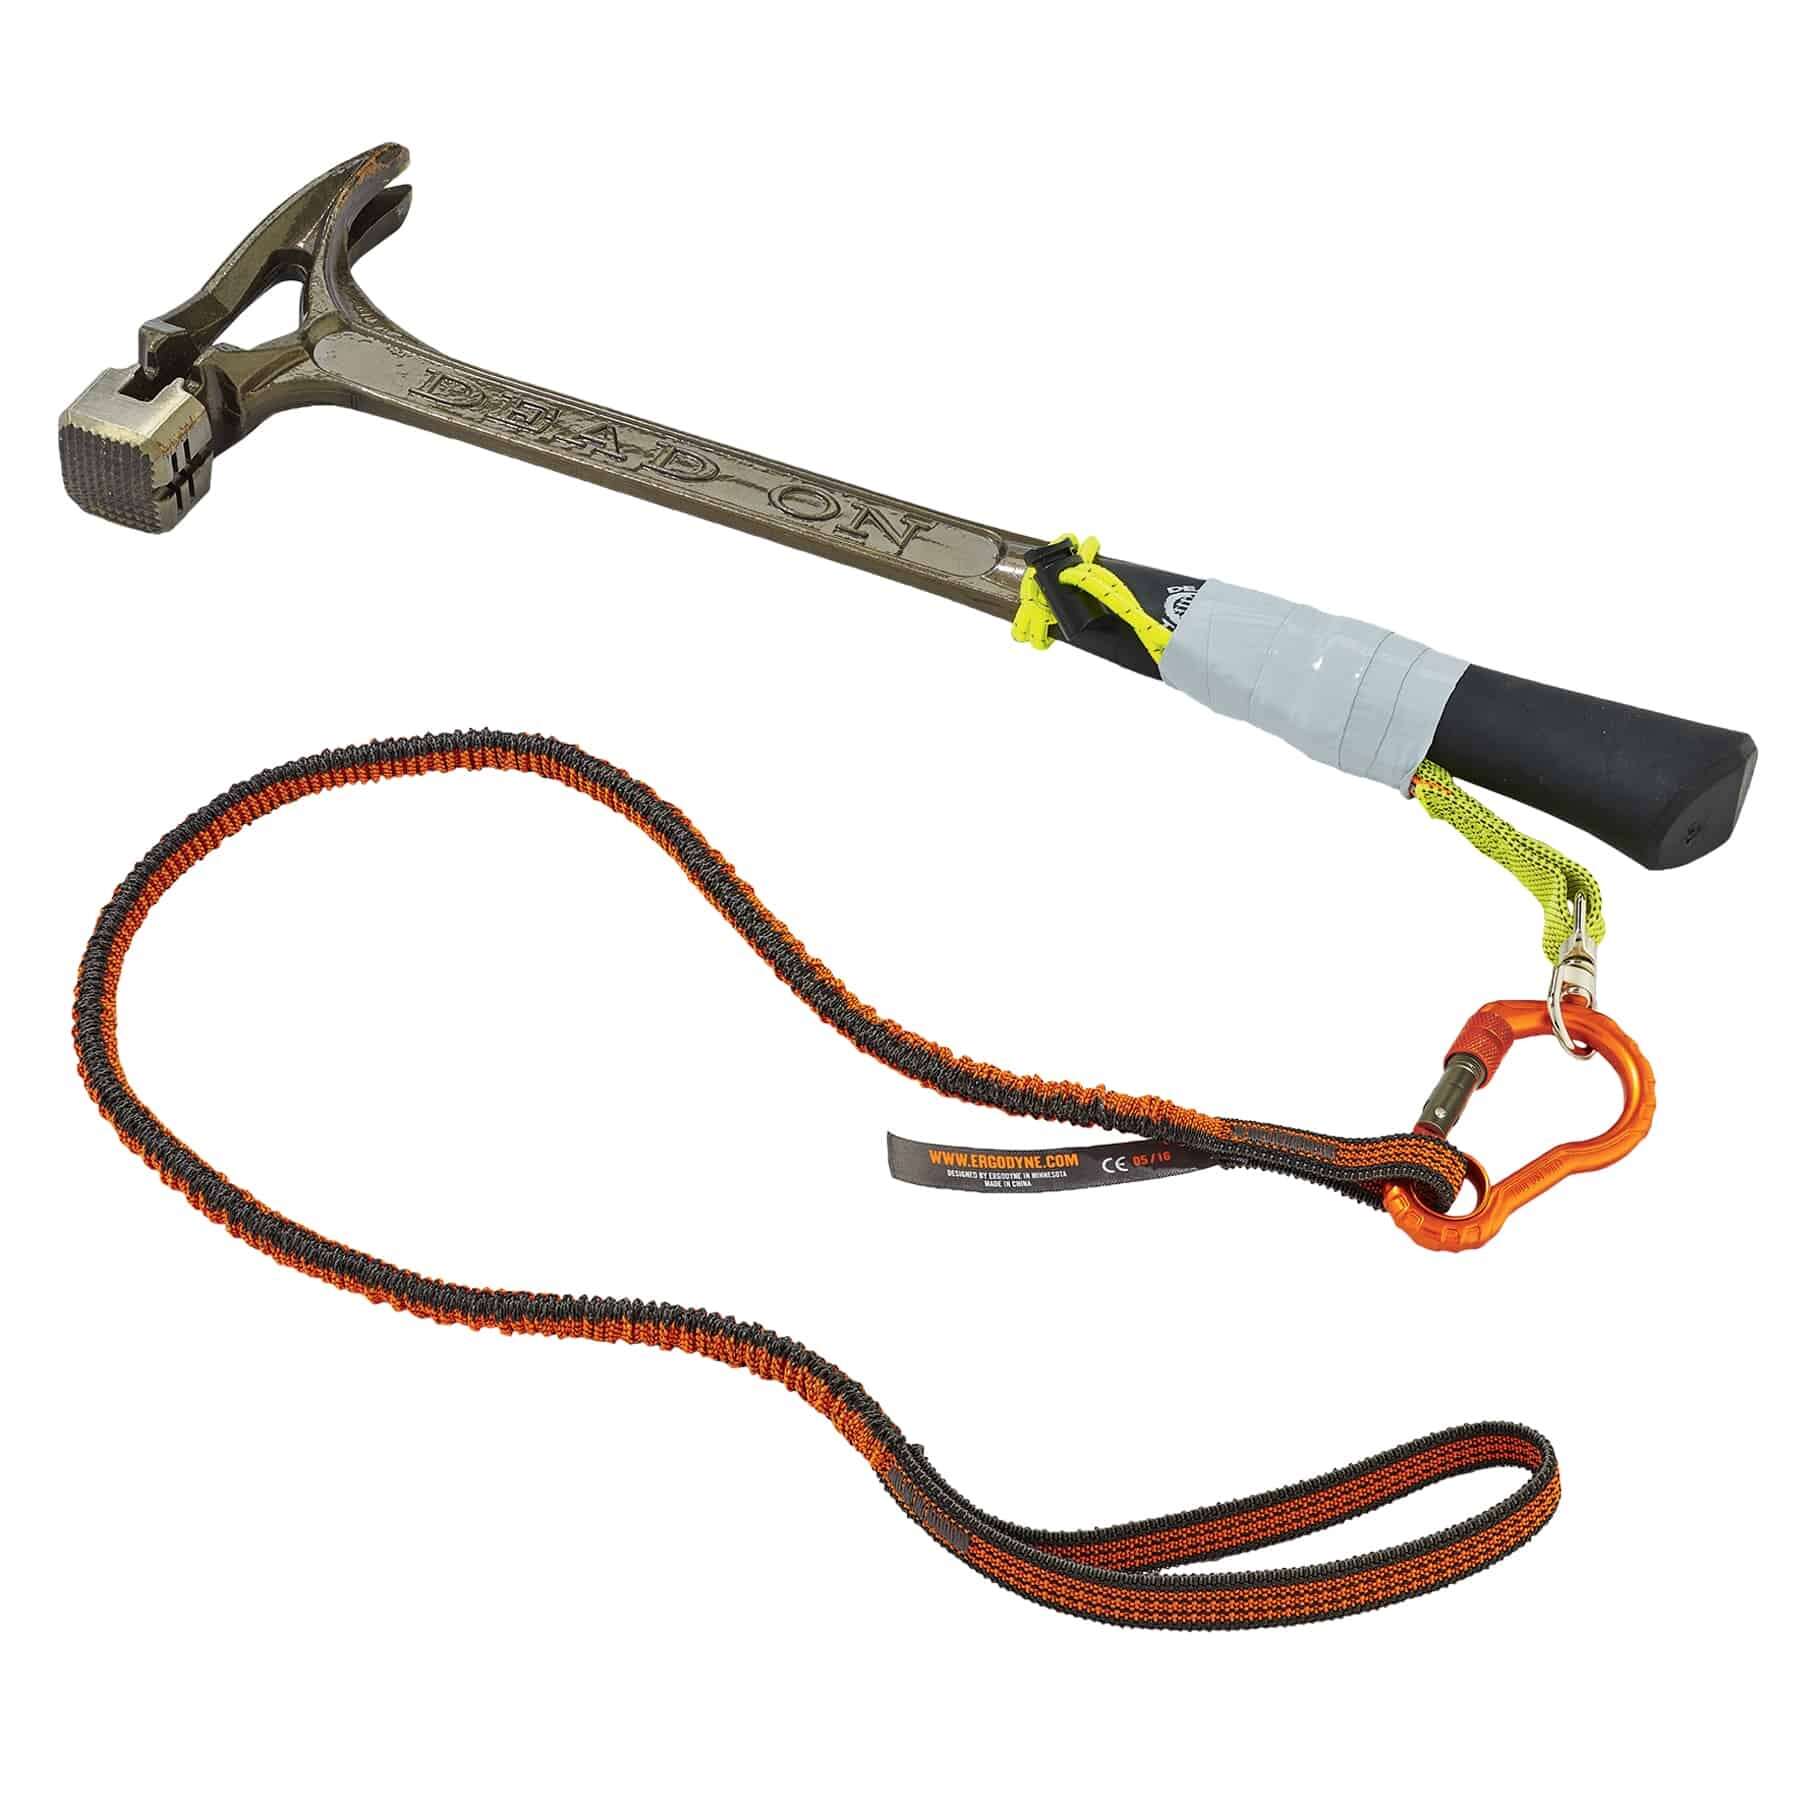 Tool Tethers - Fall Arrest Protection Equipment & Safety Gear - Keys  Ergodyne - GME Supply